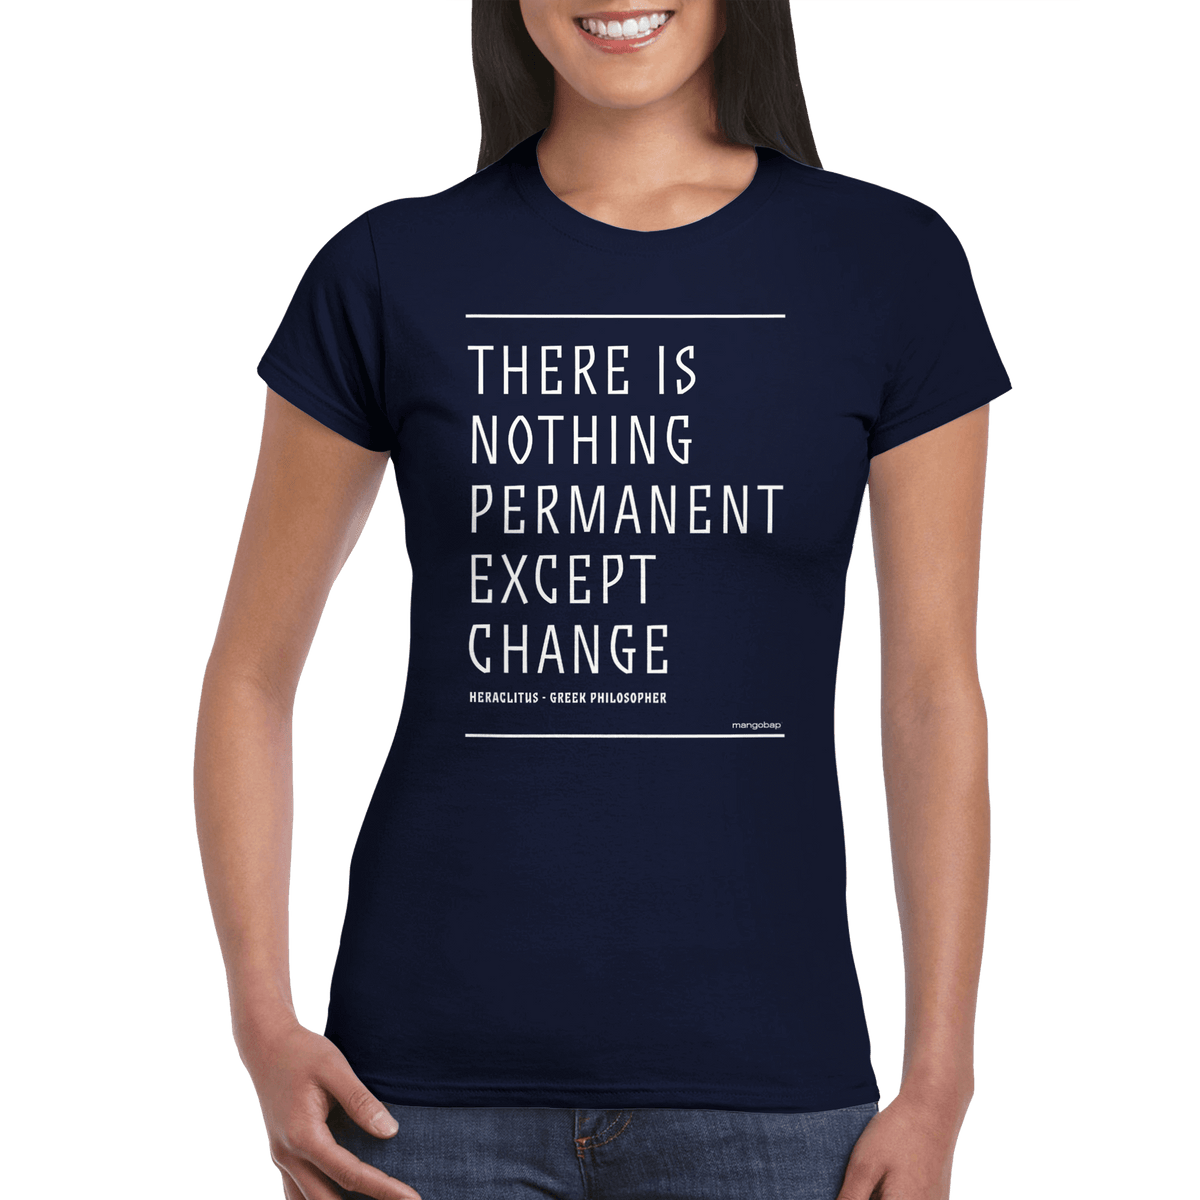 Womens There Is Nothing Permanent Except Change navy t shirt - MangoBap